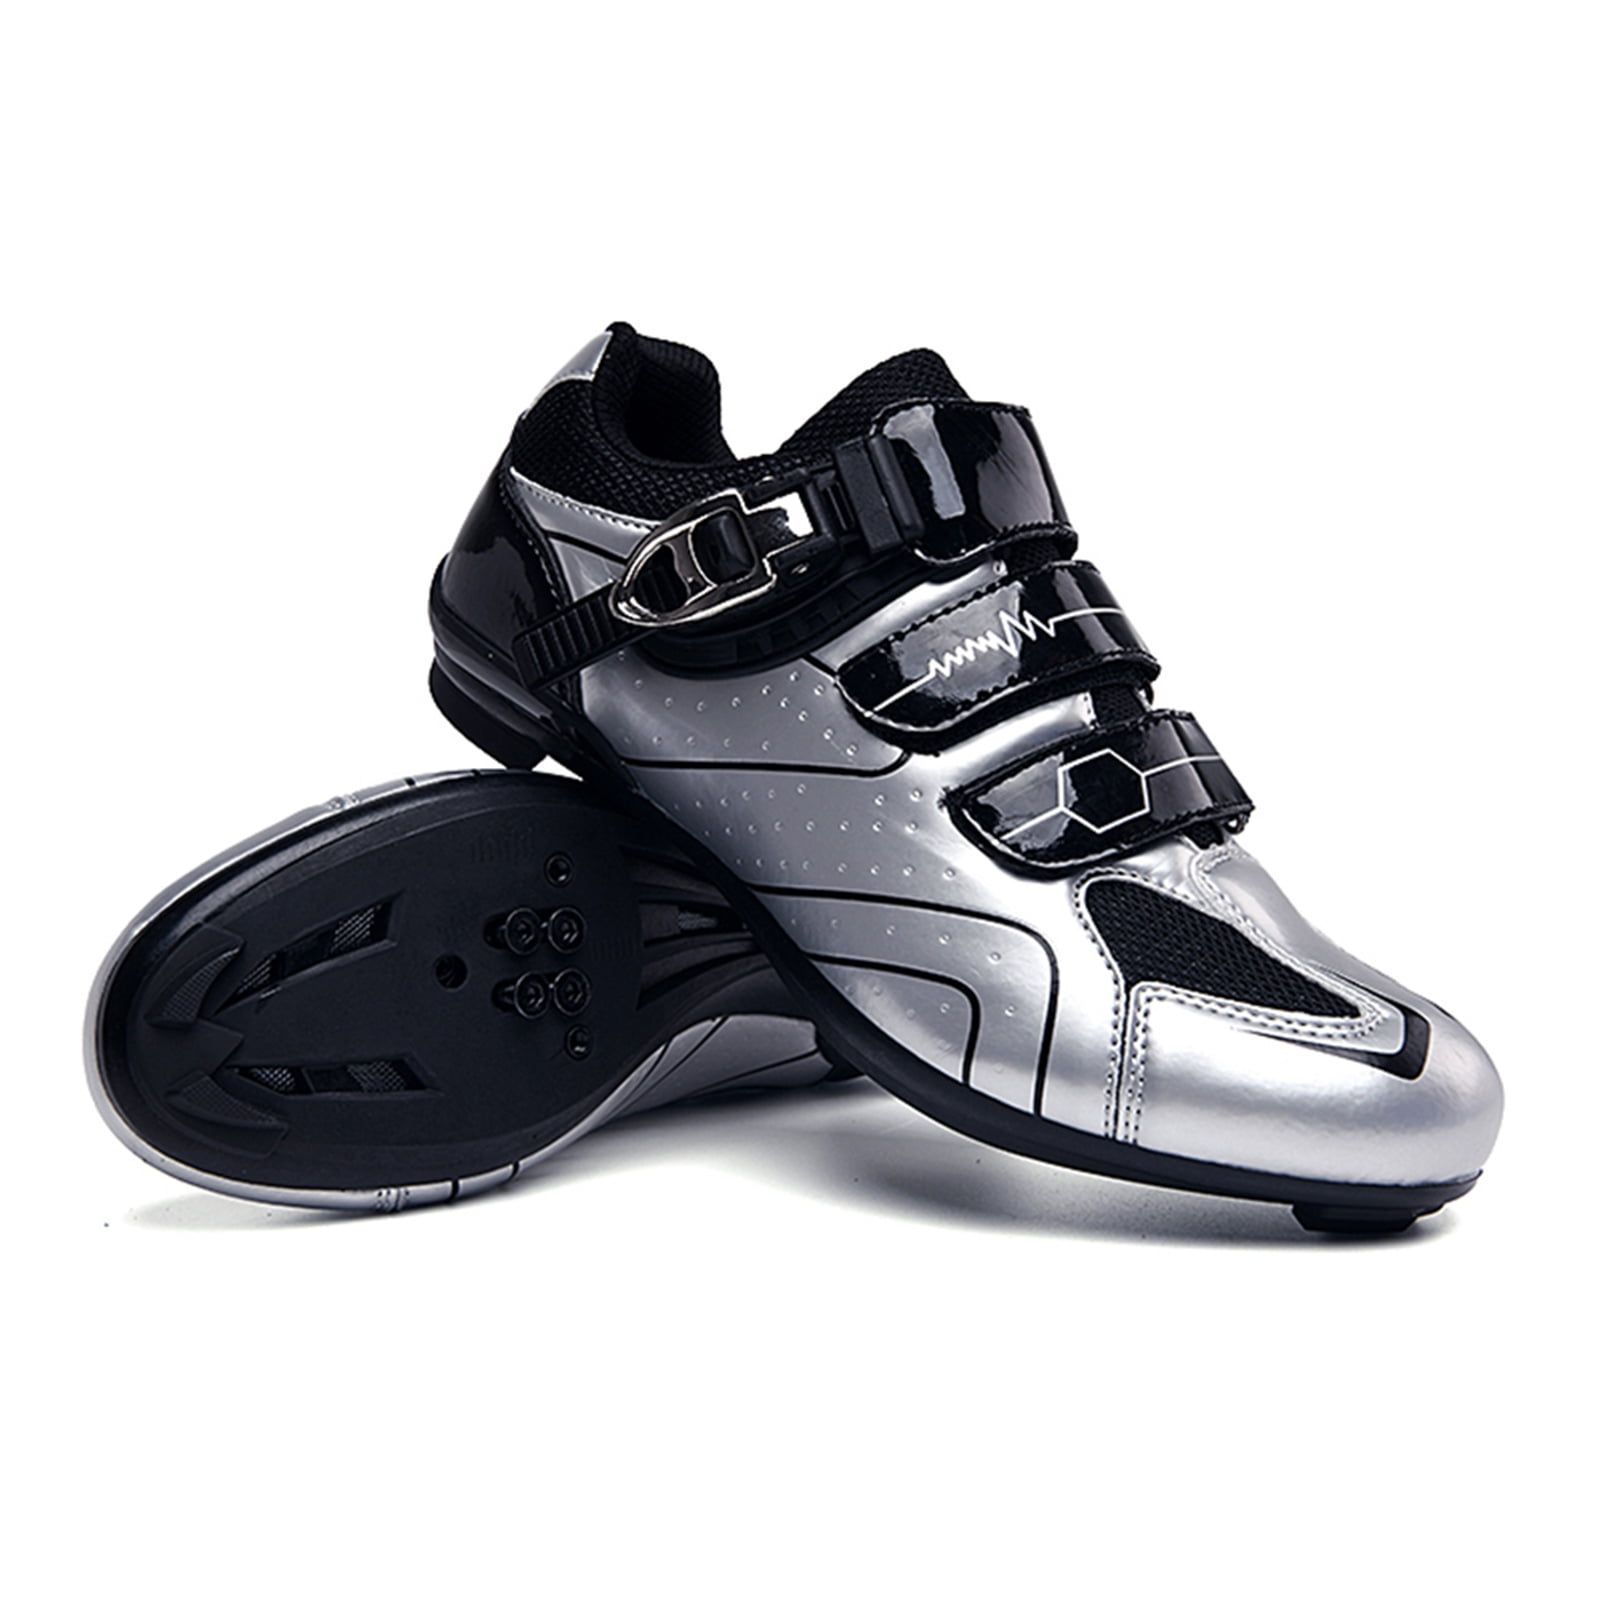 Details about   Road Cycling Shoes Men Mtb Bike Shoes Ultralight Self-locking Bicycle Sneakers 